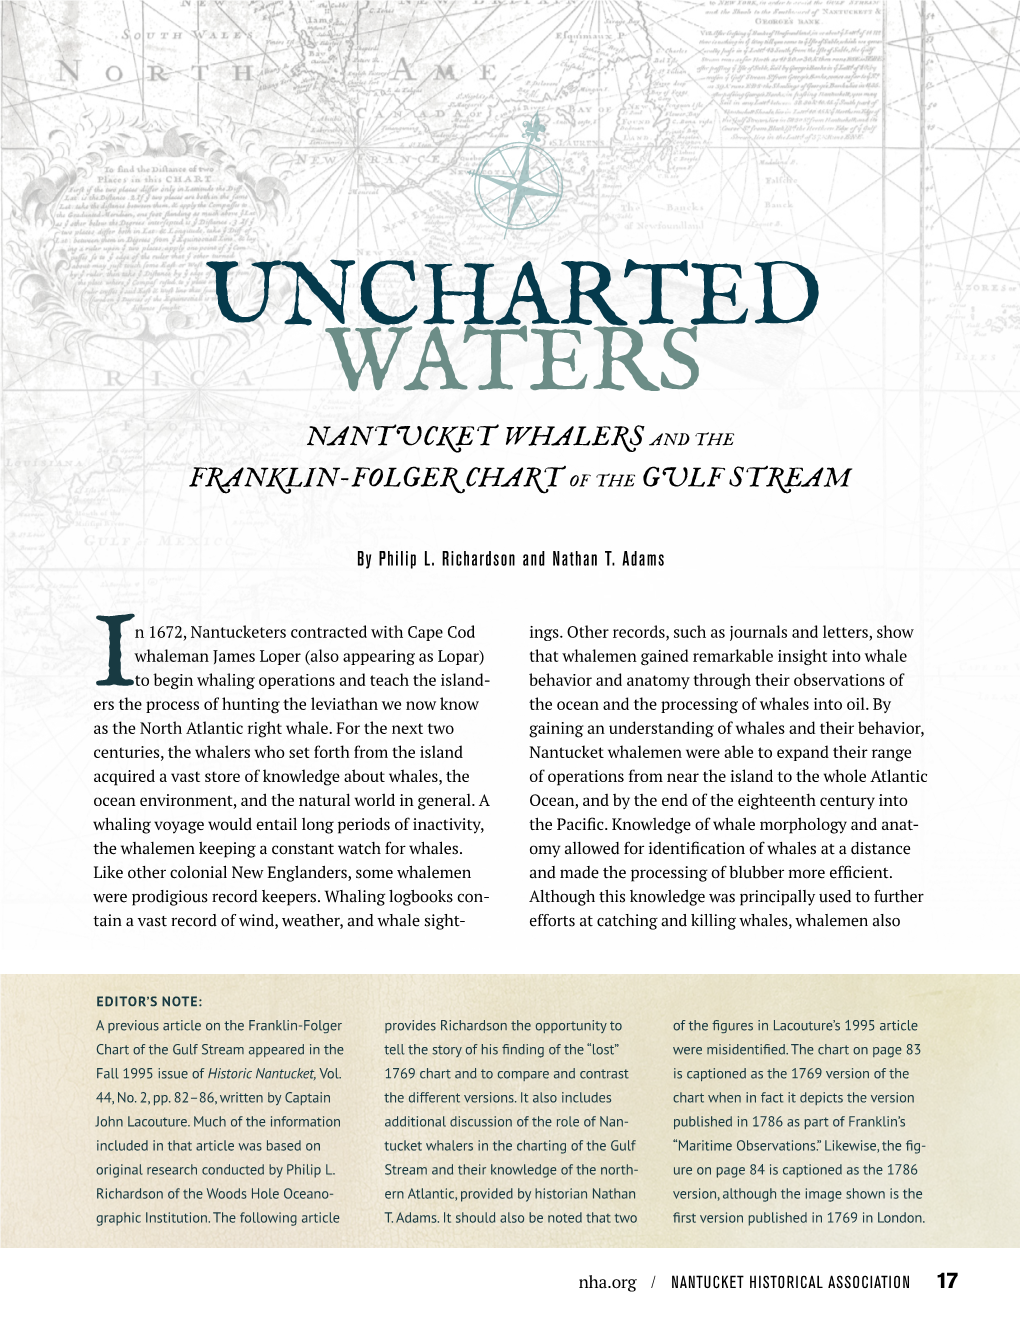 Nantucket Whalers and the Franklin-Folger Chart of the Gulf Stream